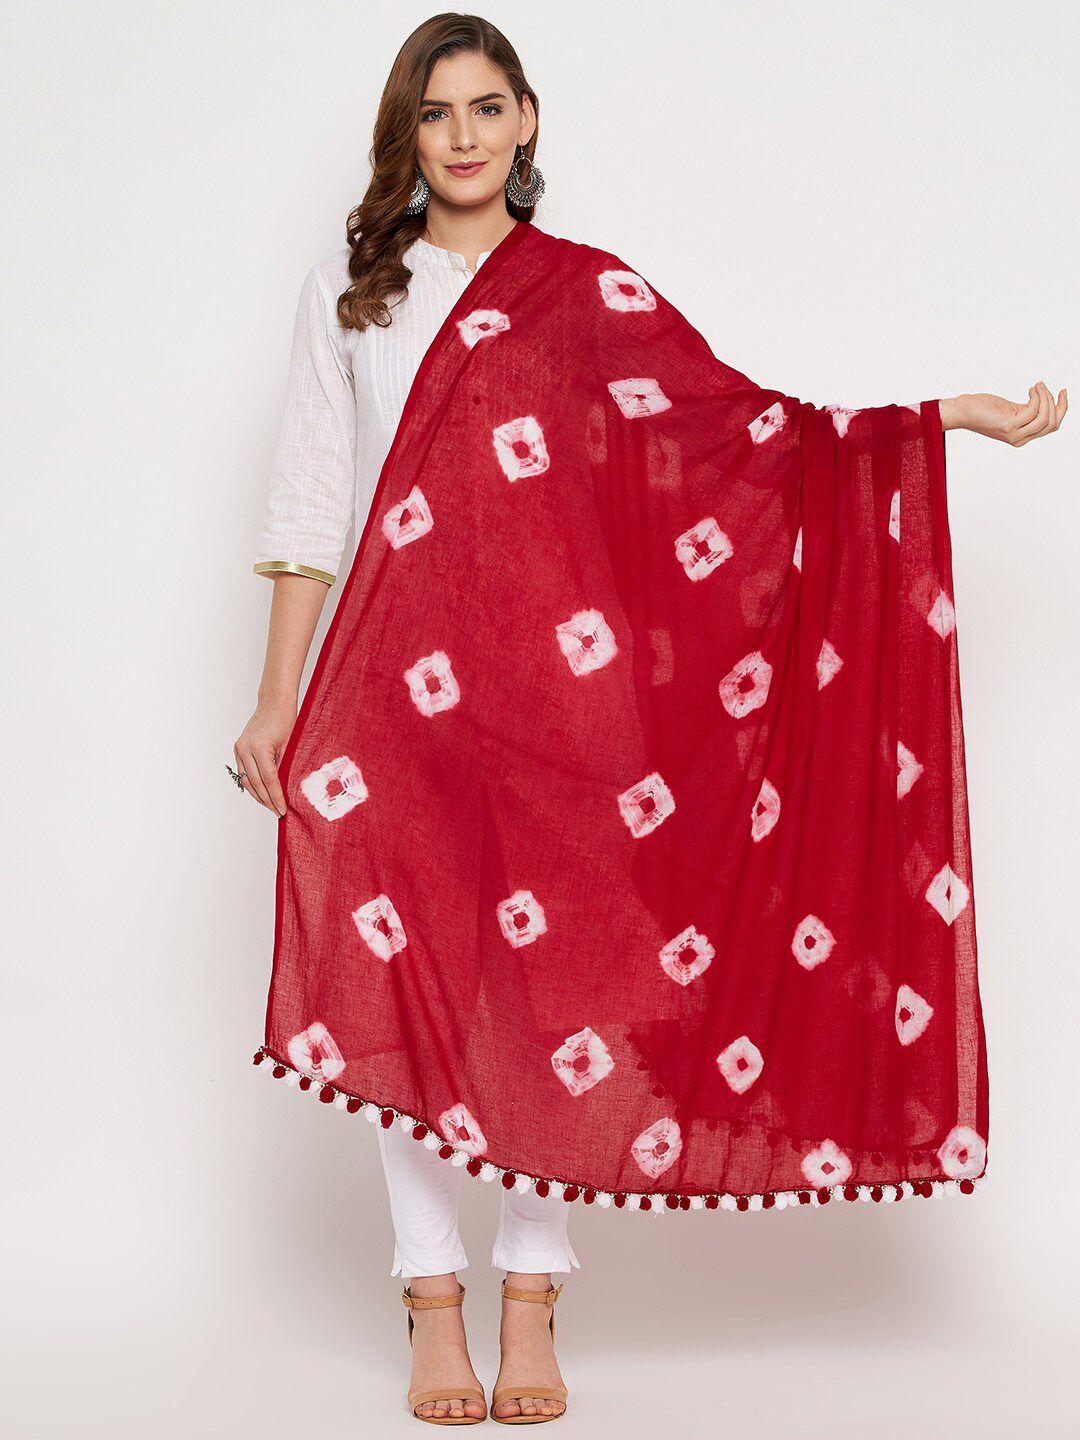 clora creation red & white printed pure cotton tie and dye dupatta